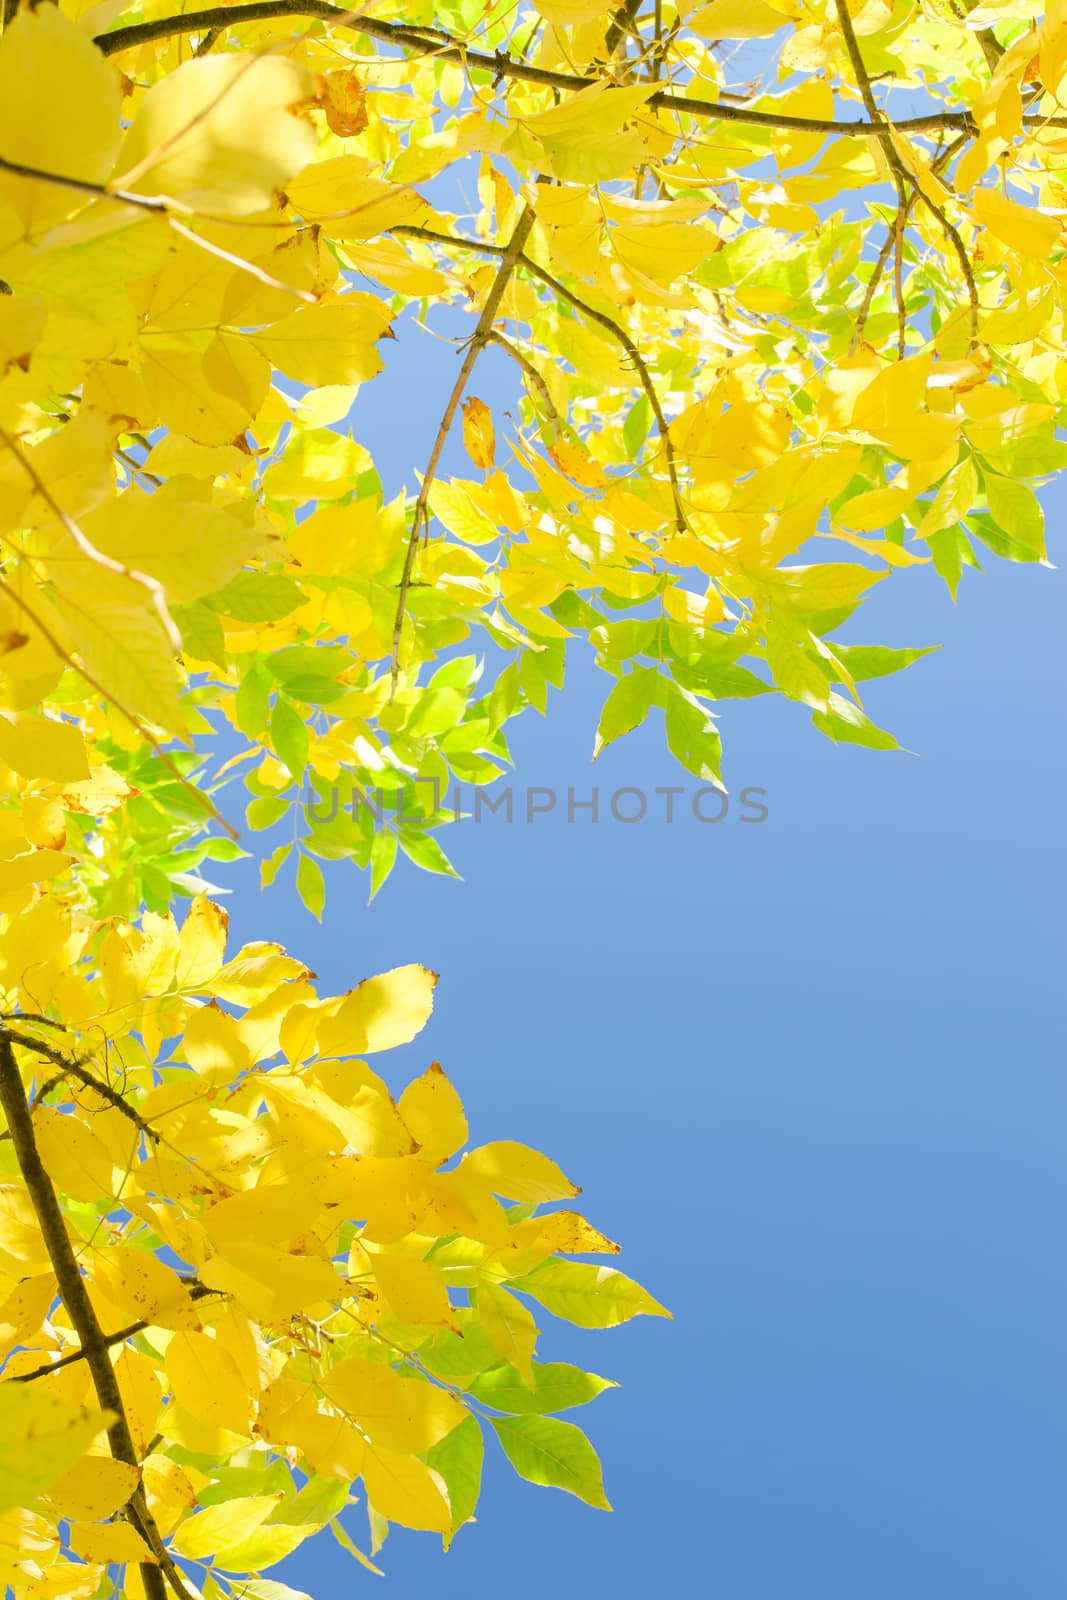 Vertical autumn background with yellow foliage over blue sky and free copy-space area for your text